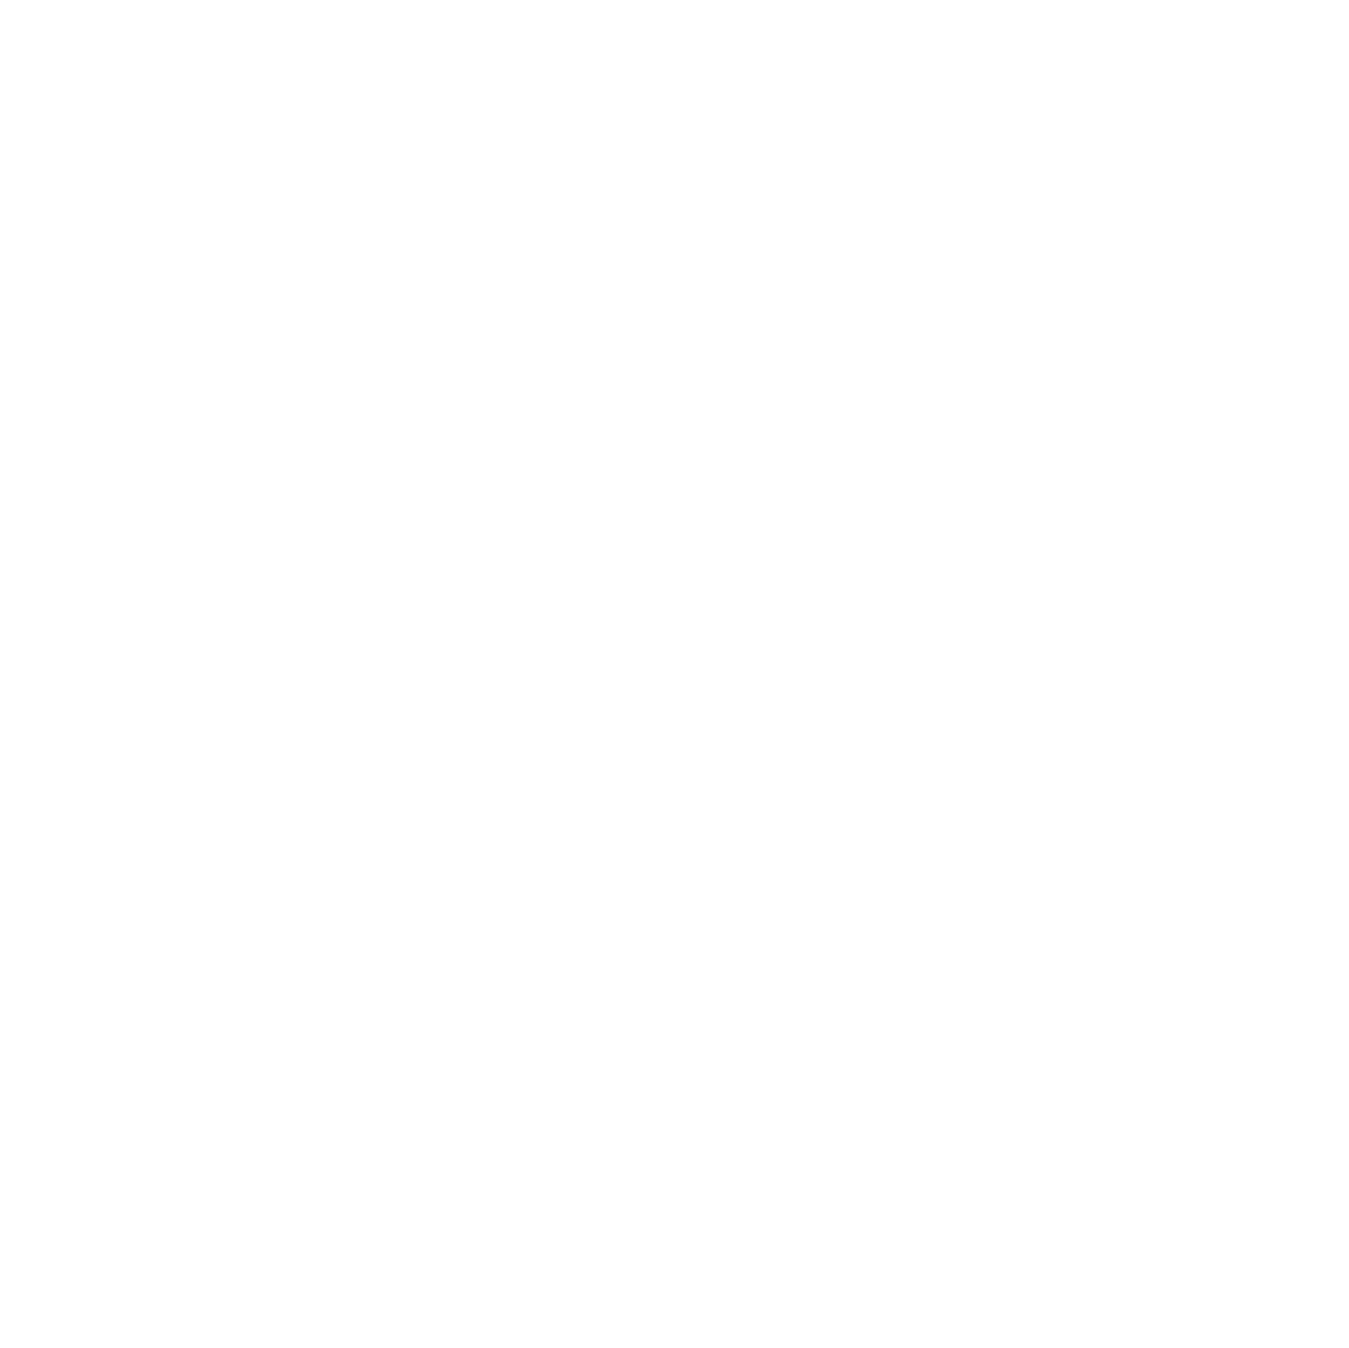 FeelGood Acupuncture